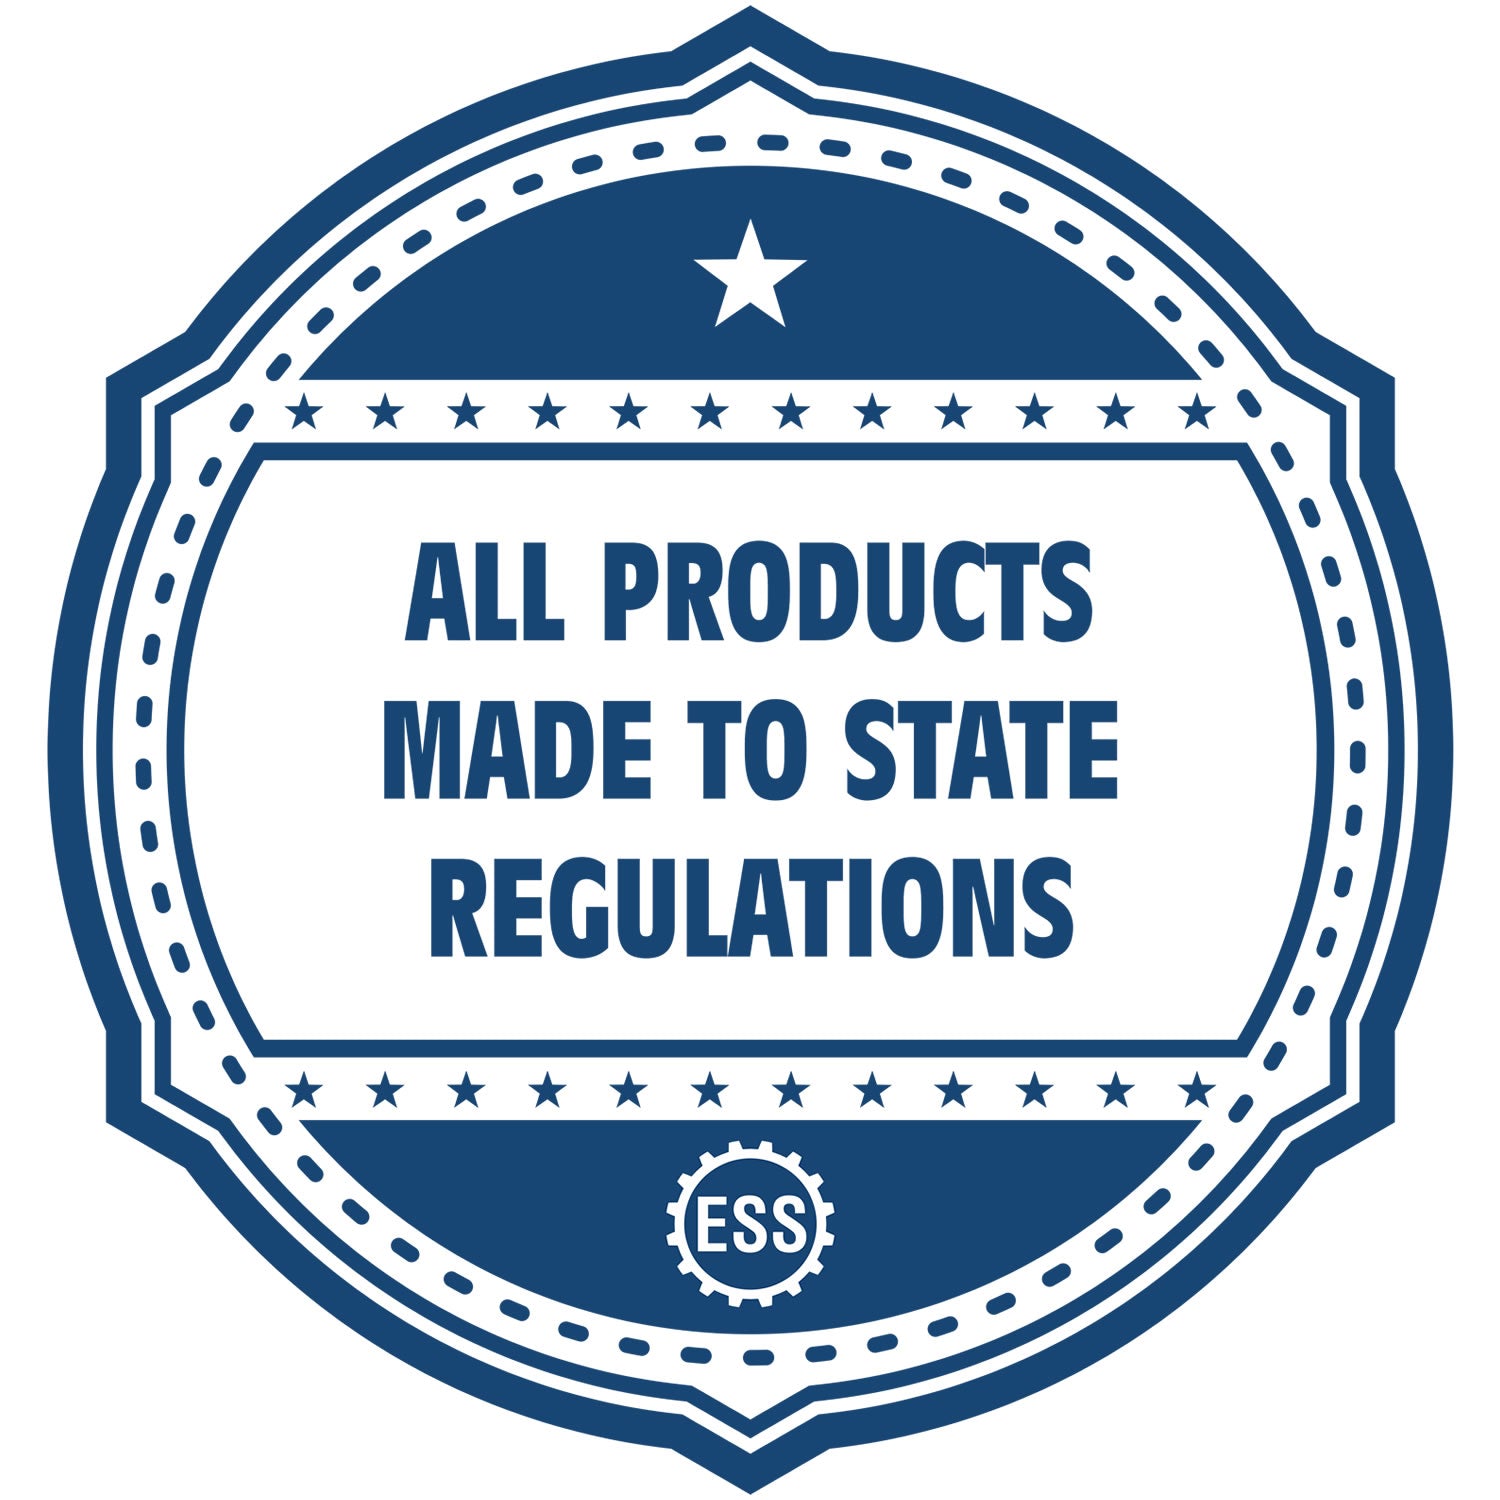 An icon or badge element for the Connecticut Long Reach Landscape Architect Embossing Stamp showing that this product is made in compliance with state regulations.